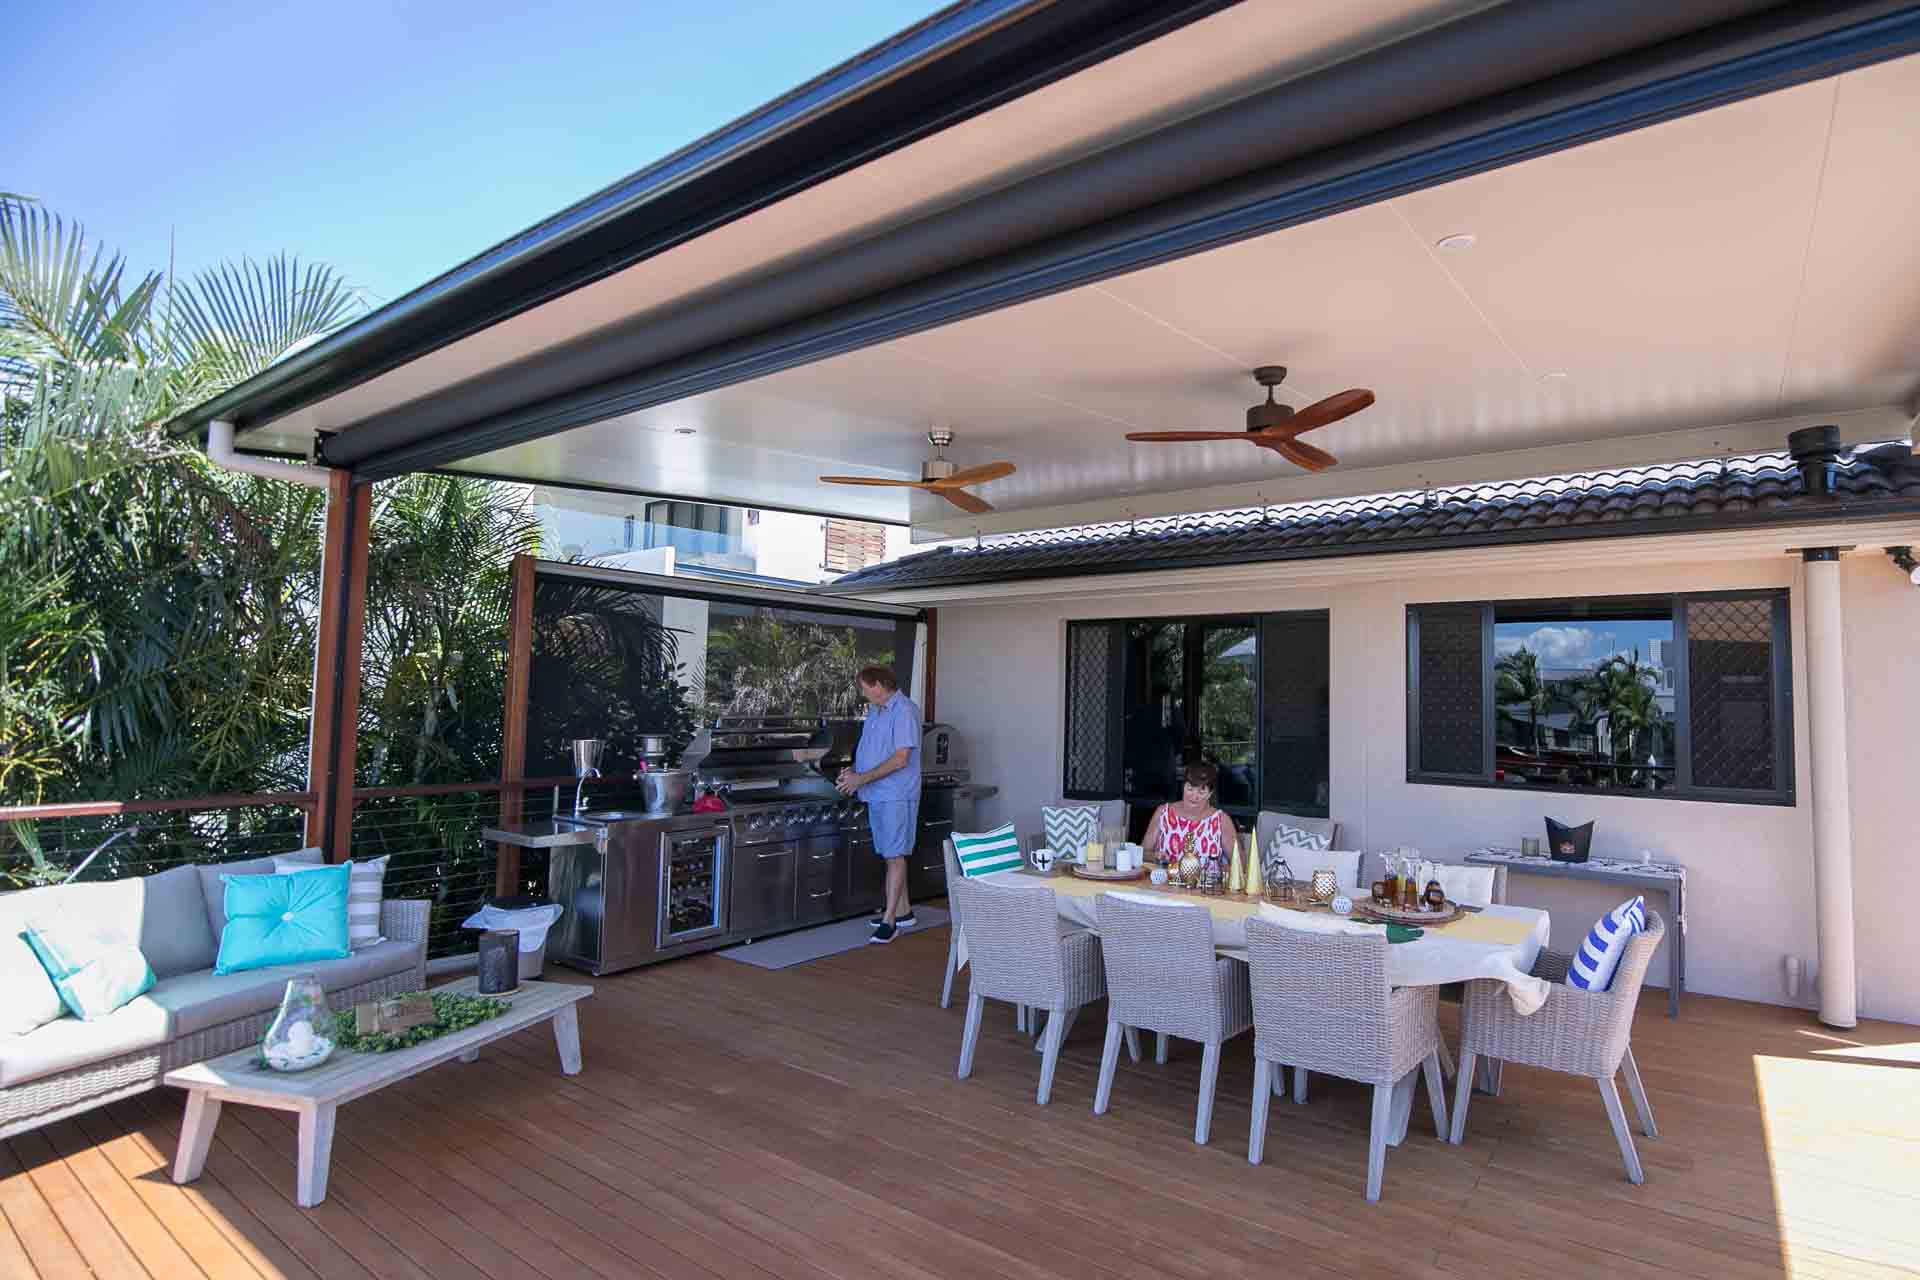 How to create the ultimate BBQ area - Cover up with a verandah, patio or pergola, Australian Outdoor Living.